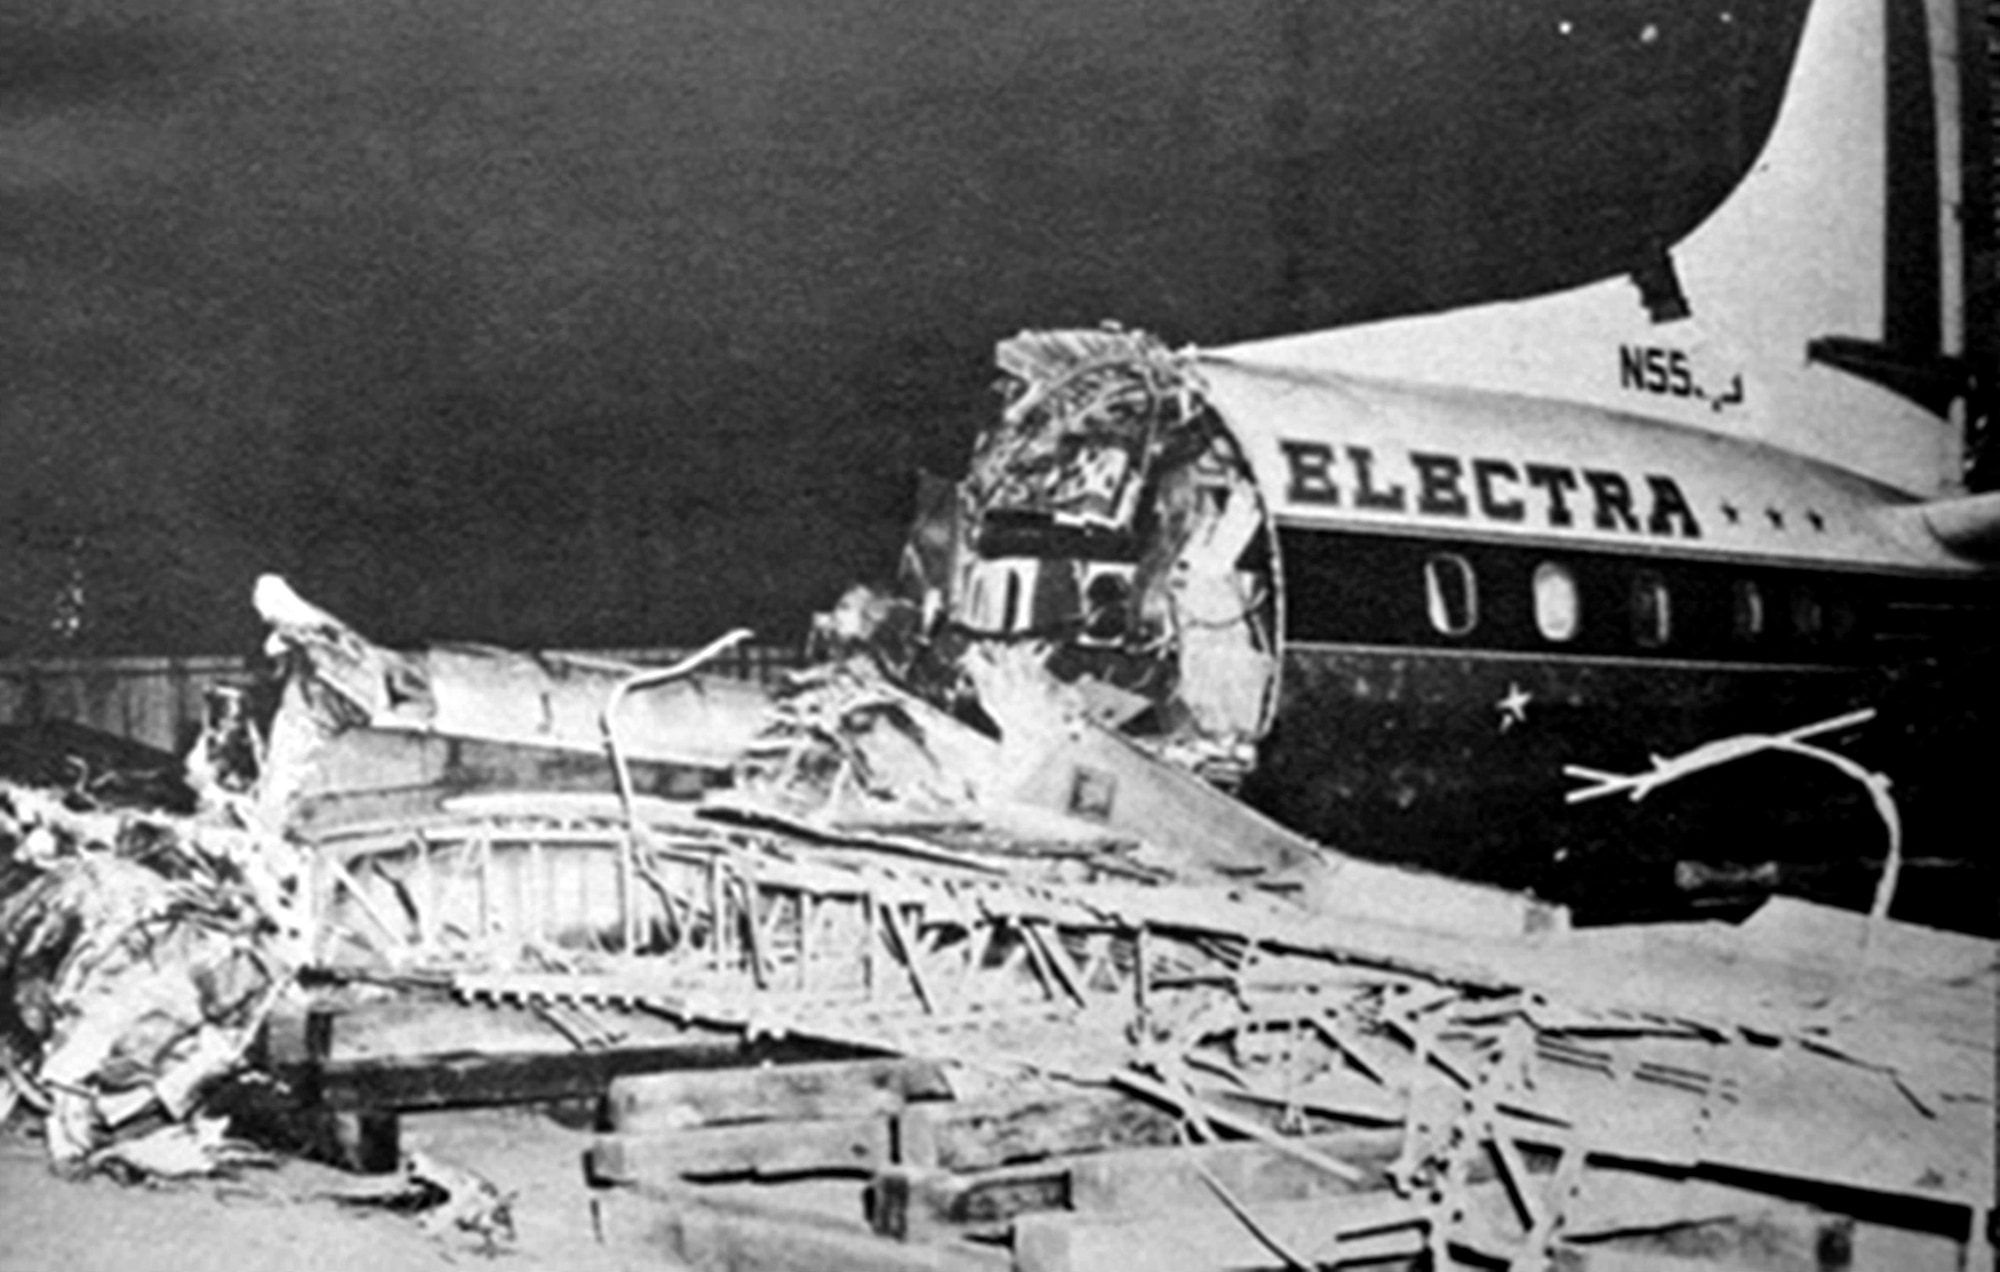 Photo of the crash of Eastern Air Lines Flight 375, a Lockheed L-188 Electra that was brought down by a bird strike in 1960. The photo was taken by the Civil Aeronautics Board (CAB) in the course of their investigation of the crash.